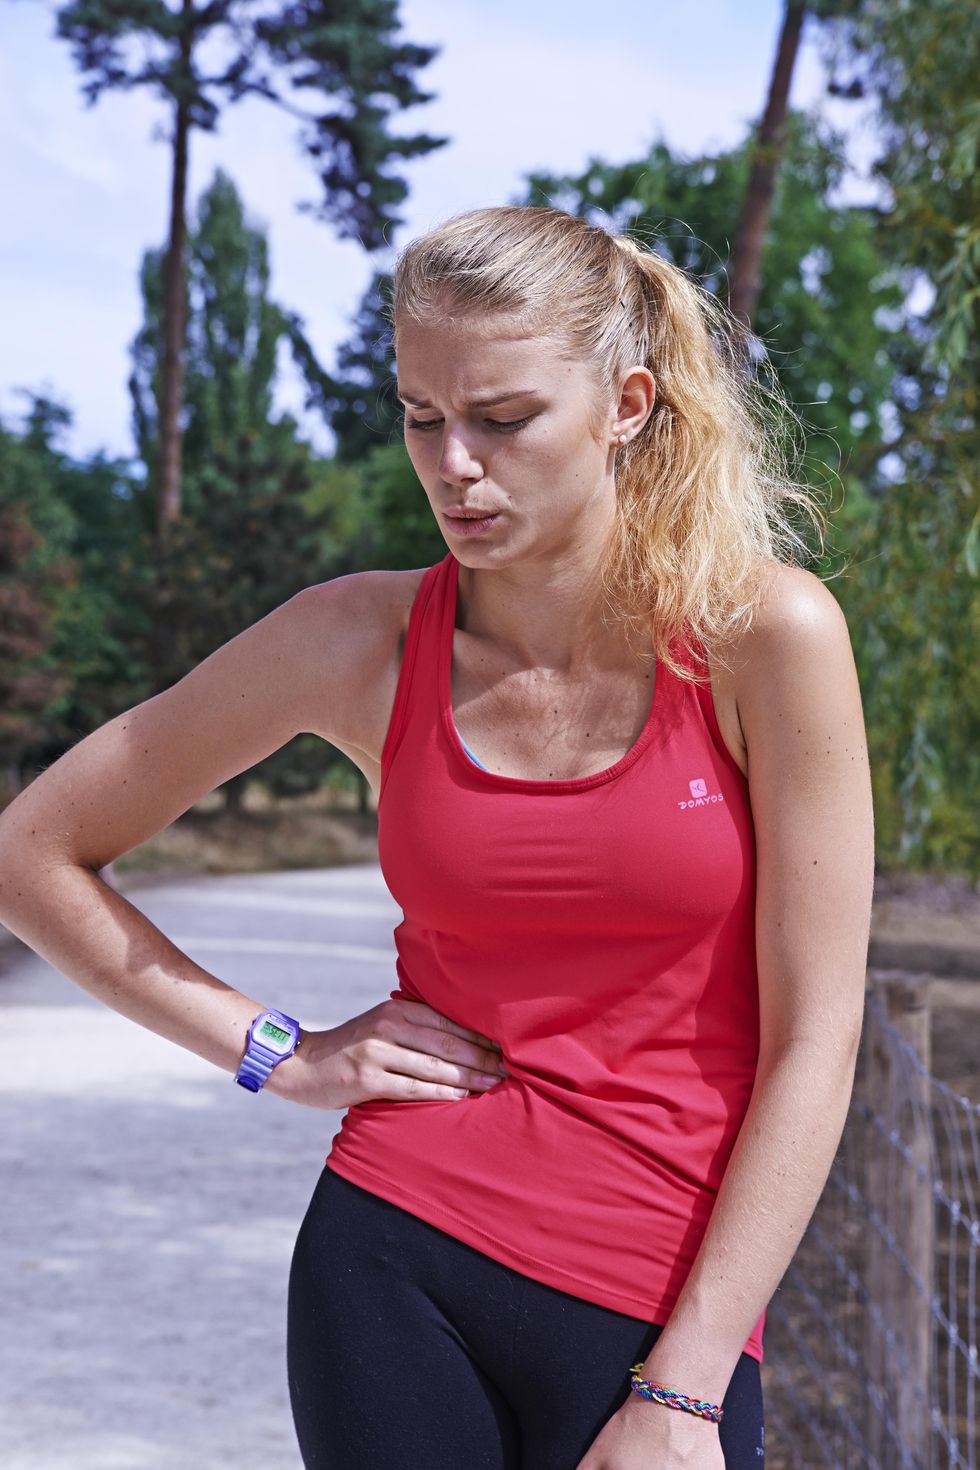 jogger suffering from a side stitch photo by  bsipuniversal images group via getty images